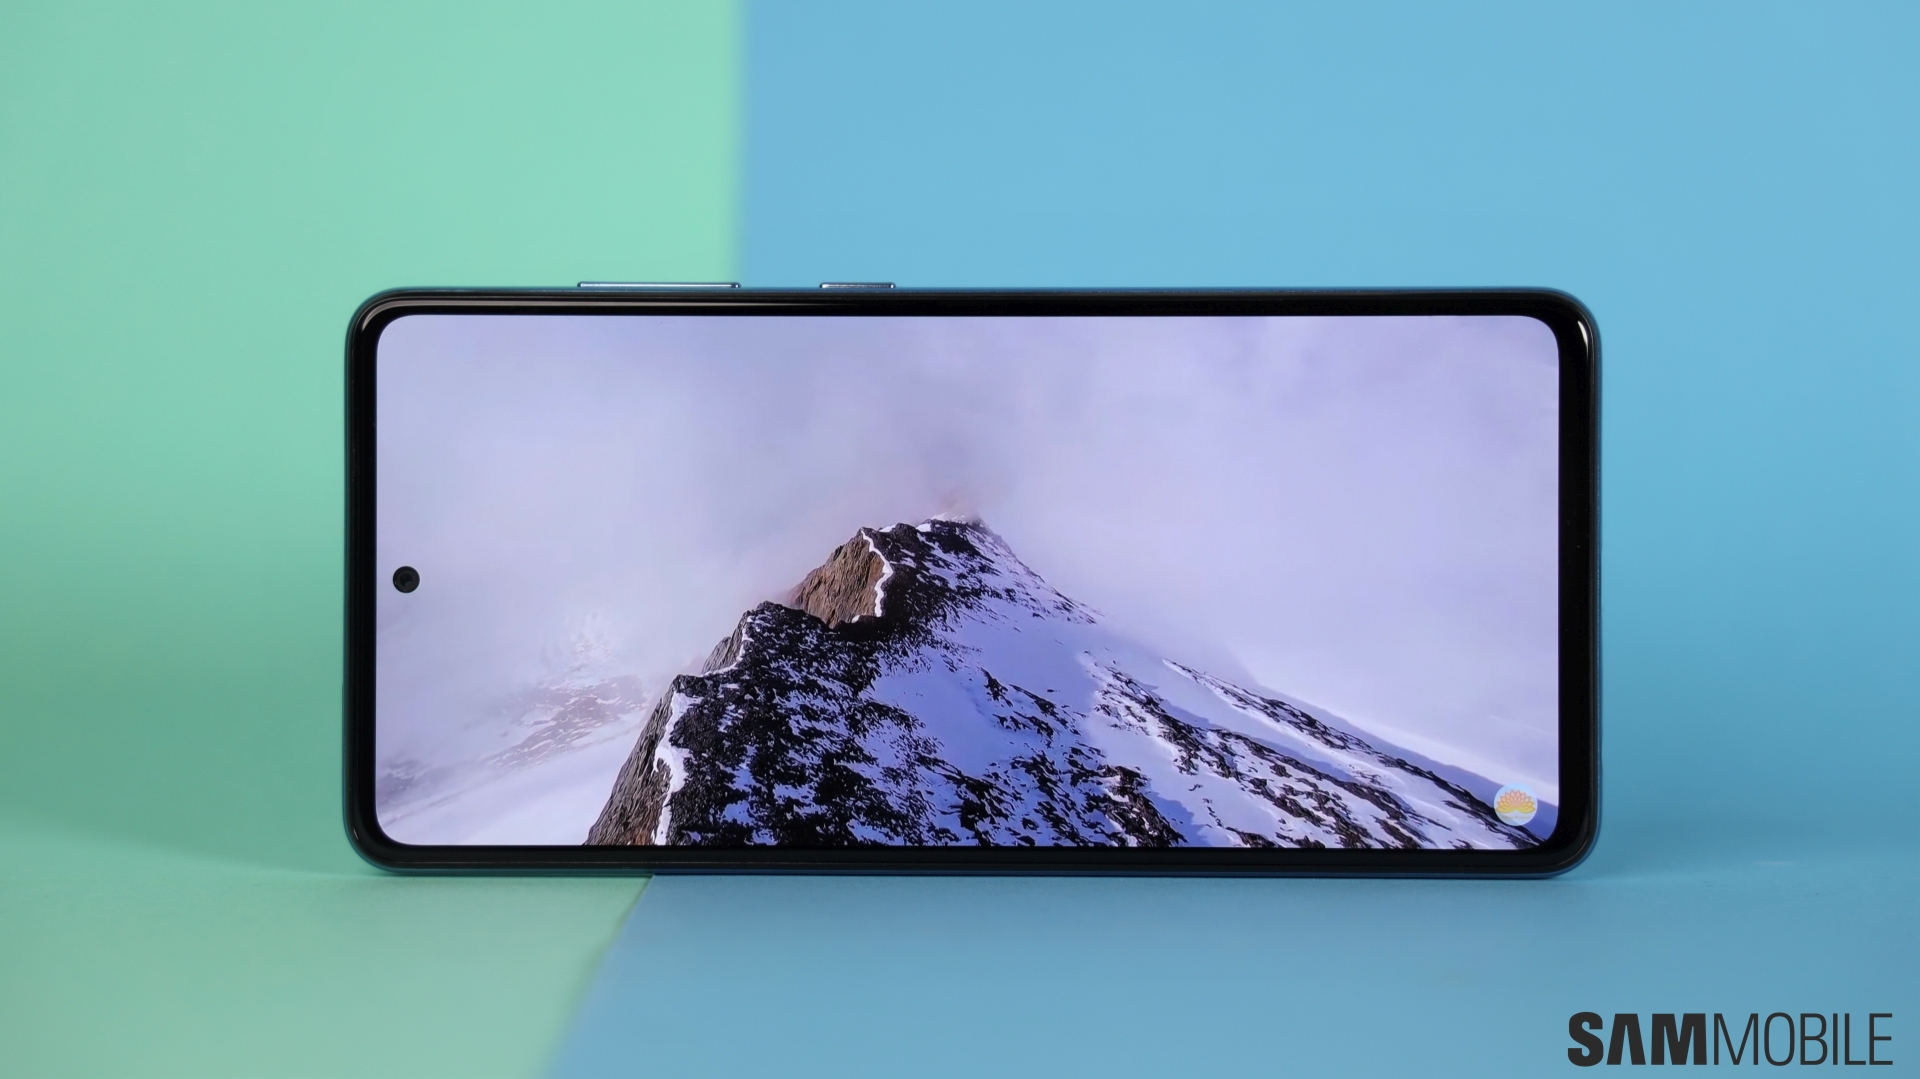 Samsung Galaxy Note 10+ camera review: is this the summit?